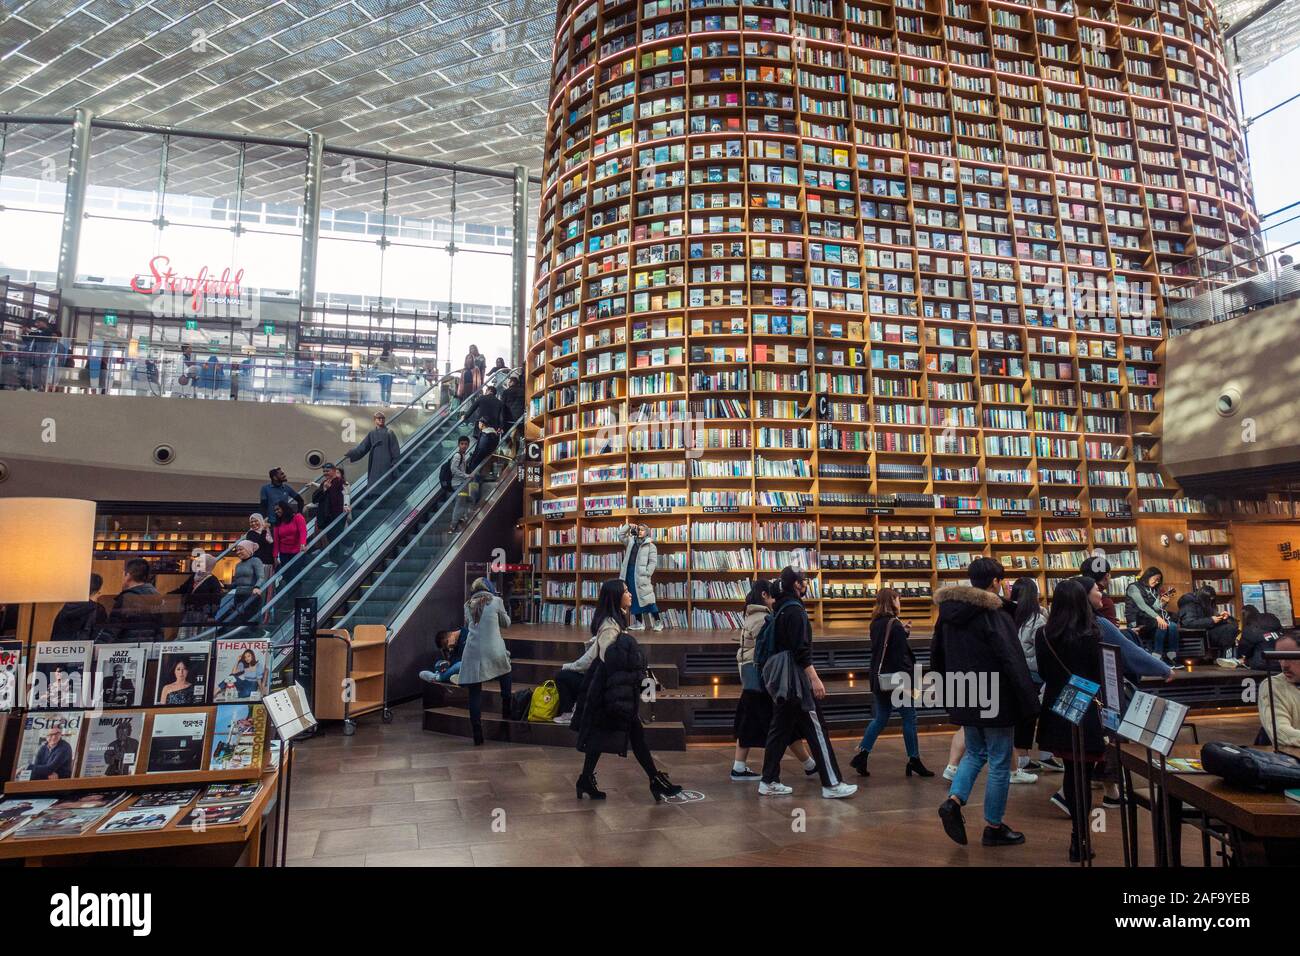 Seoul, South Korea - November 22nd, 2019: Starfield Library is an open public space where anyone can freely come to sit down and read books. Stock Photo